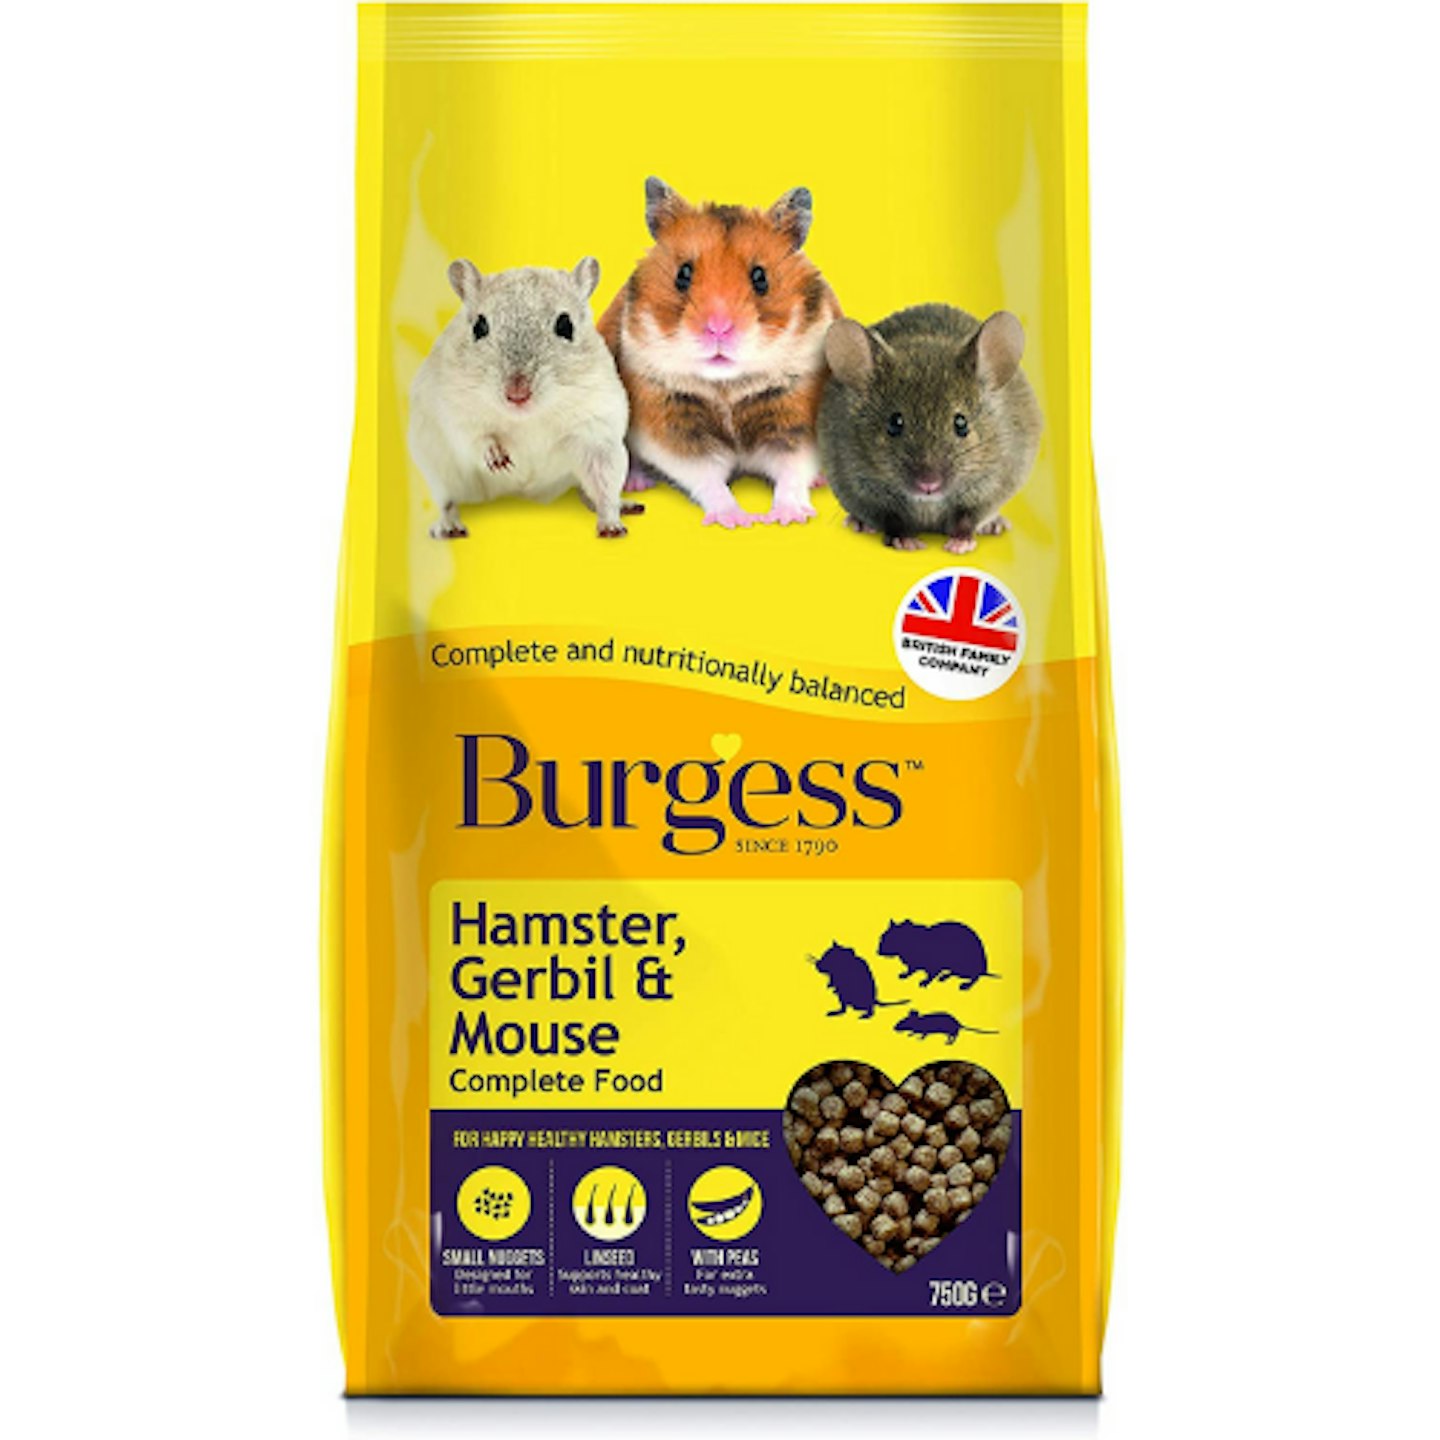 Burgess Hamster, Gerbil and Mouse Food, 750g